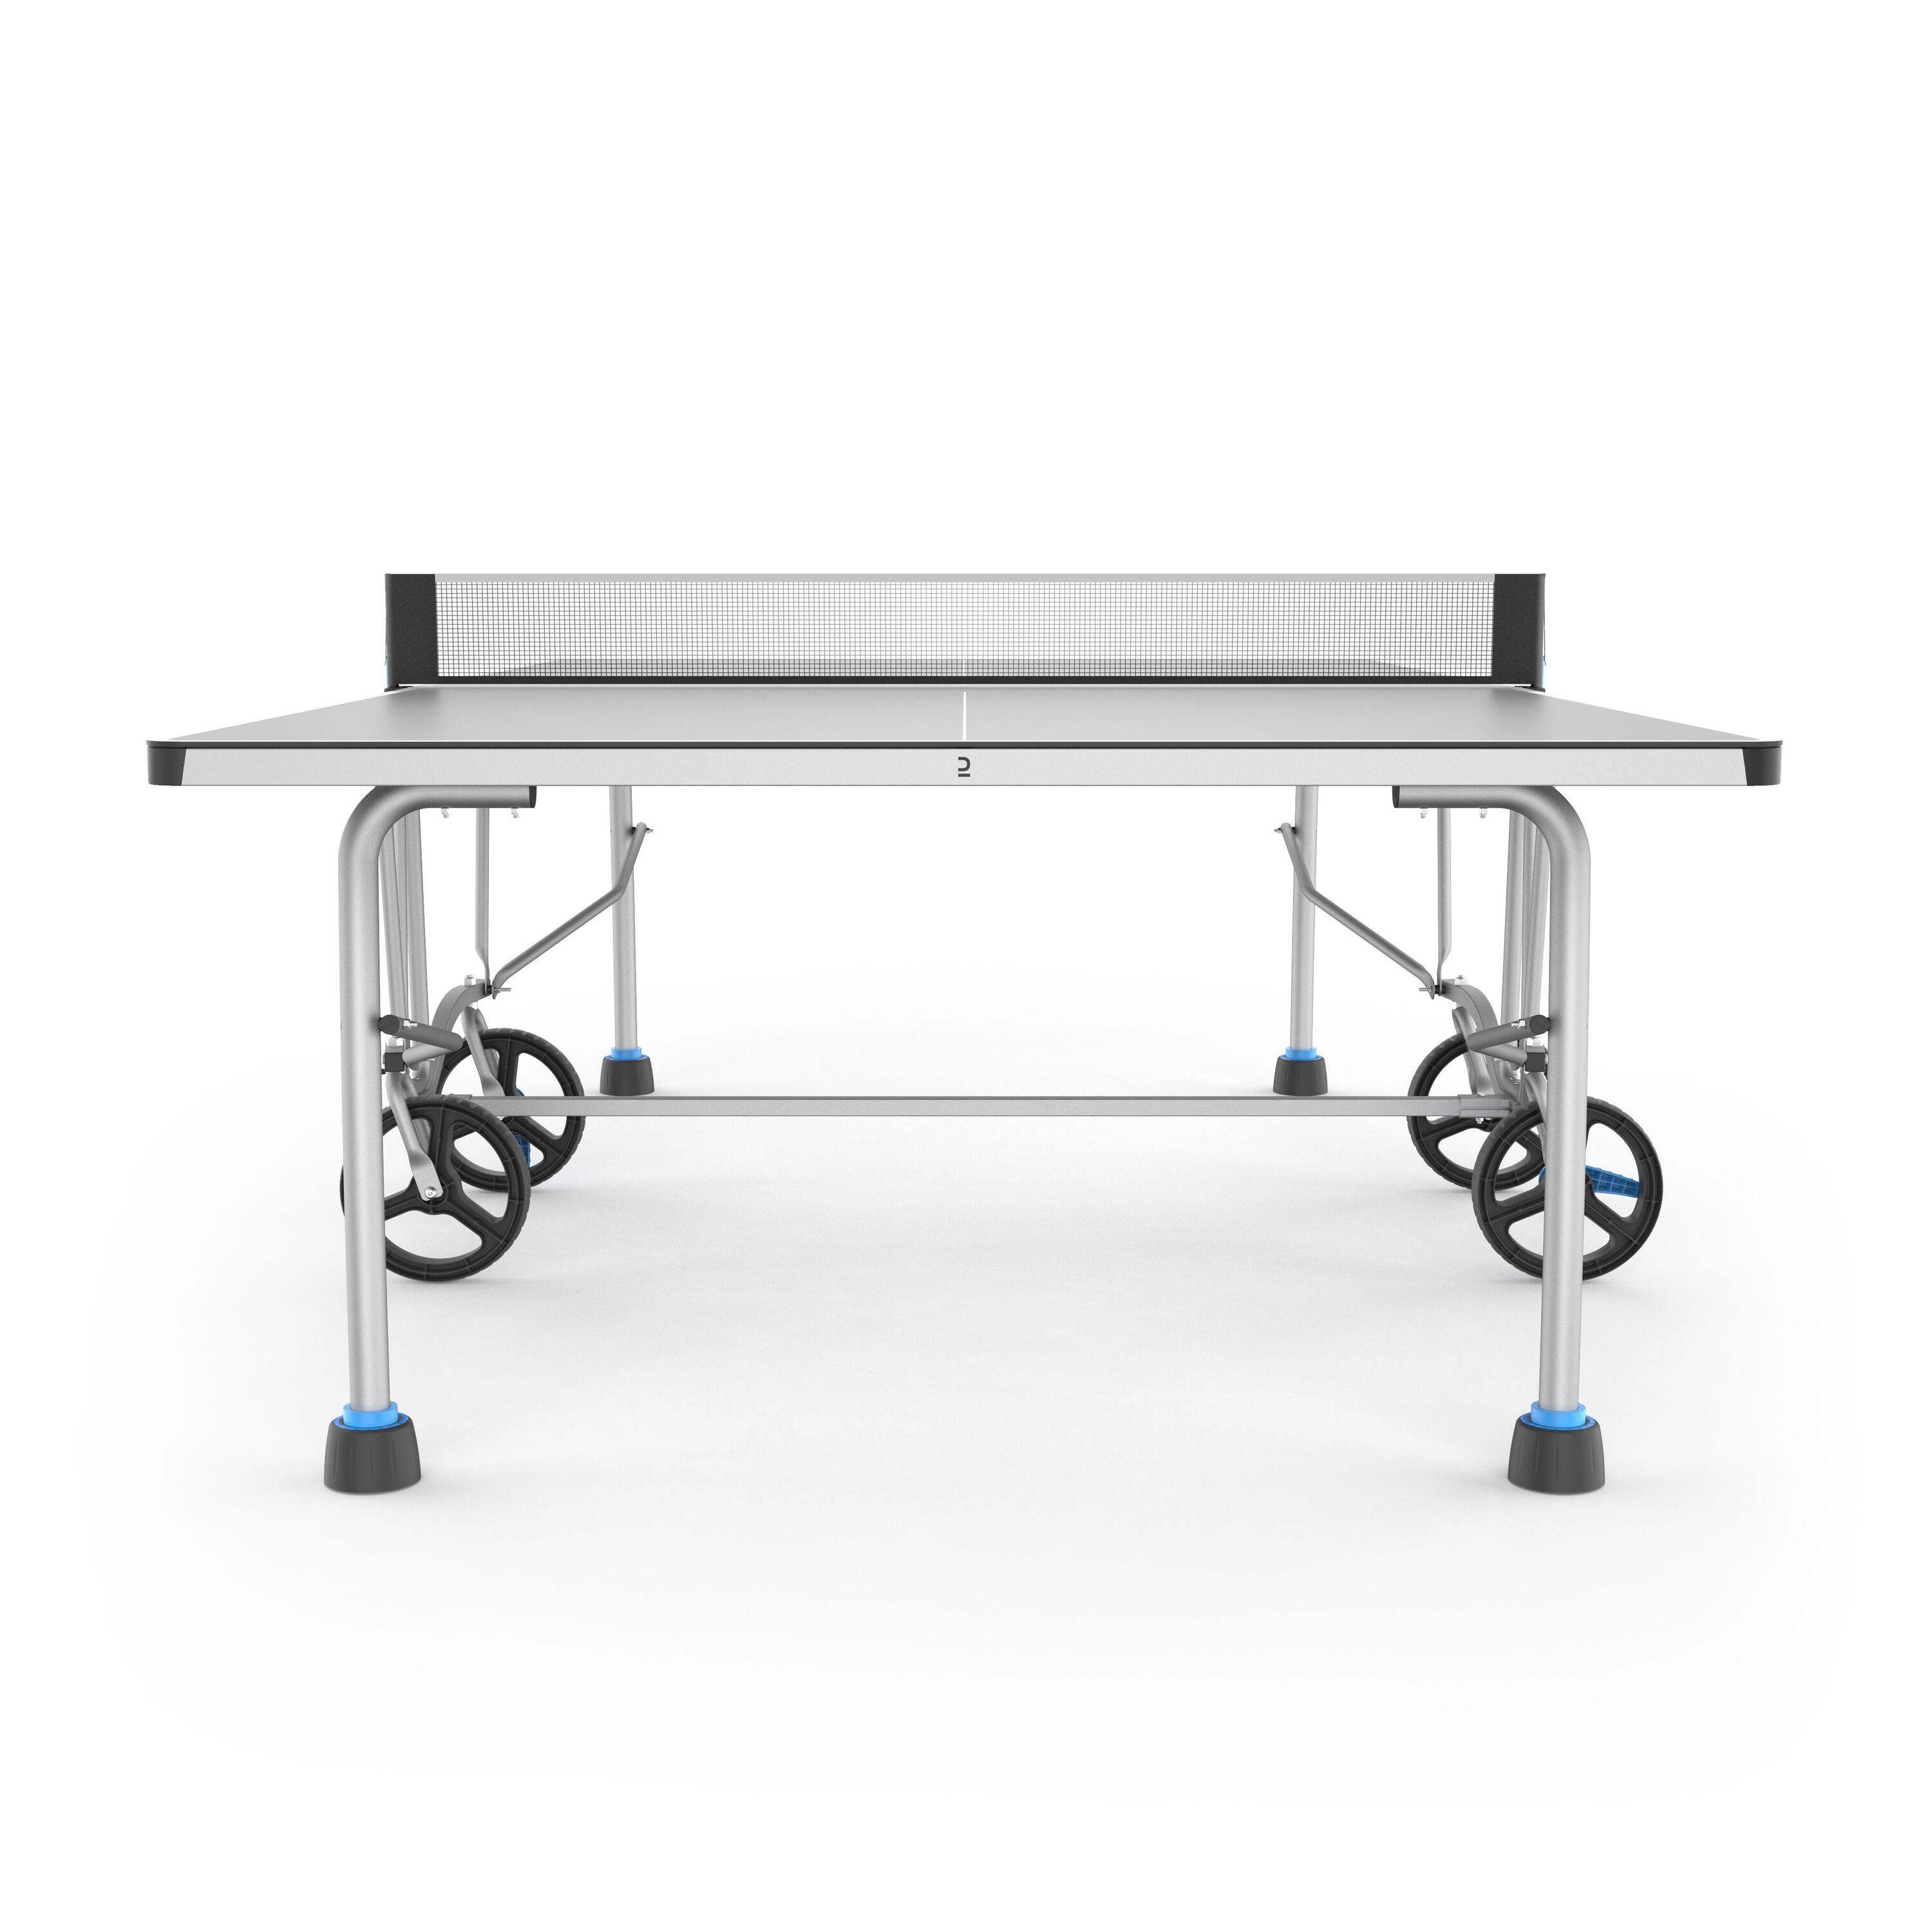 Outdoor Table Tennis Table PPT 530.2 - Grey 11/13